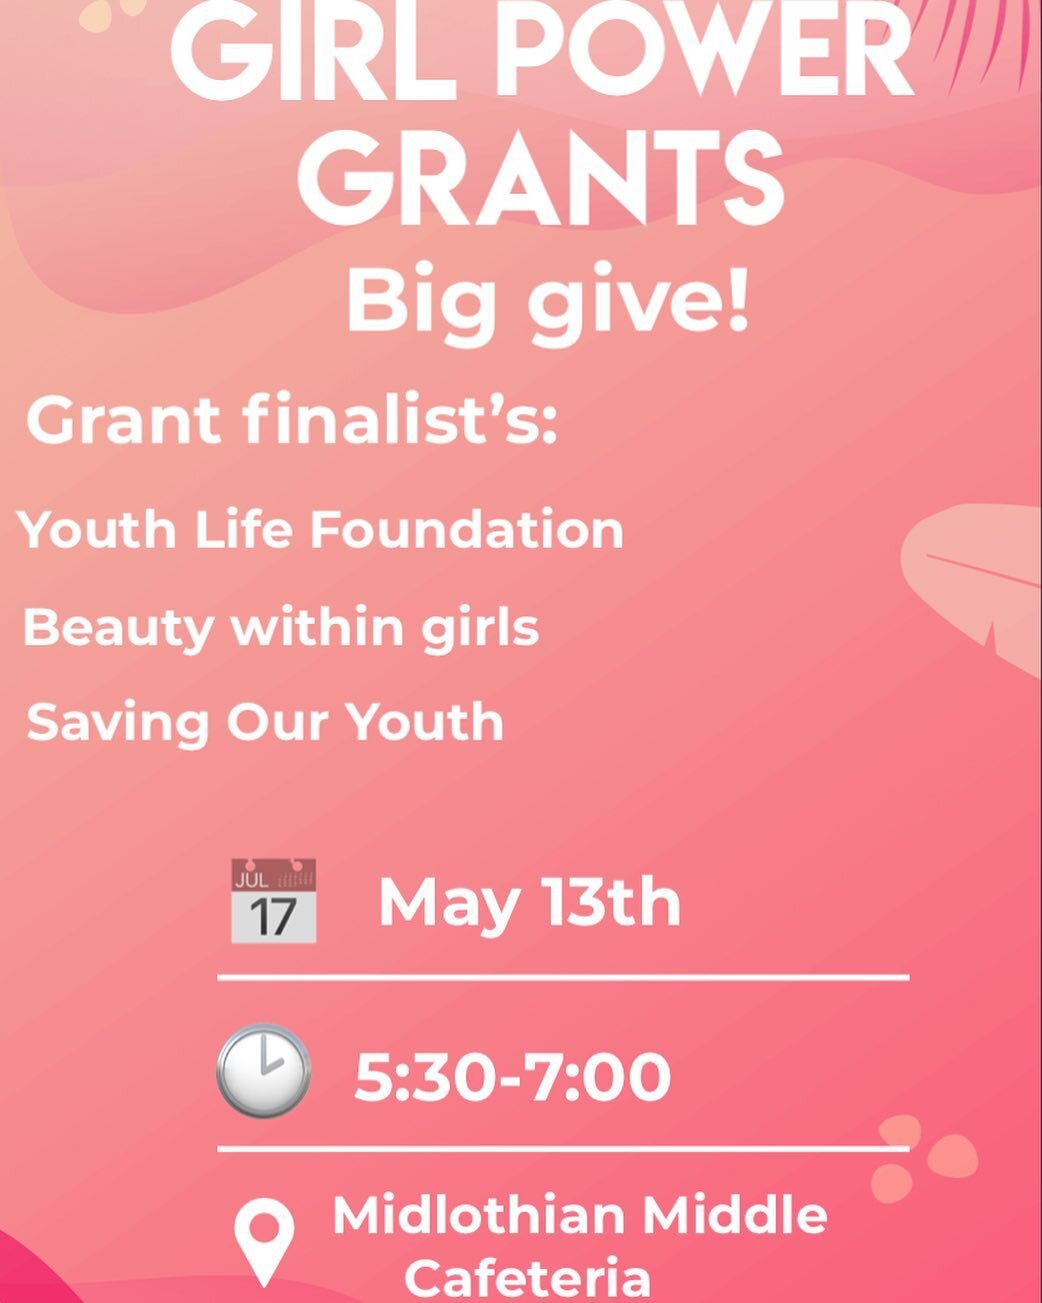 Girl power grants 2022 Big Give will be May 13 from 5:30 to 7:00! Hope to see you there! 🌸
 Thanks @ivy_brown44  for the design 😌